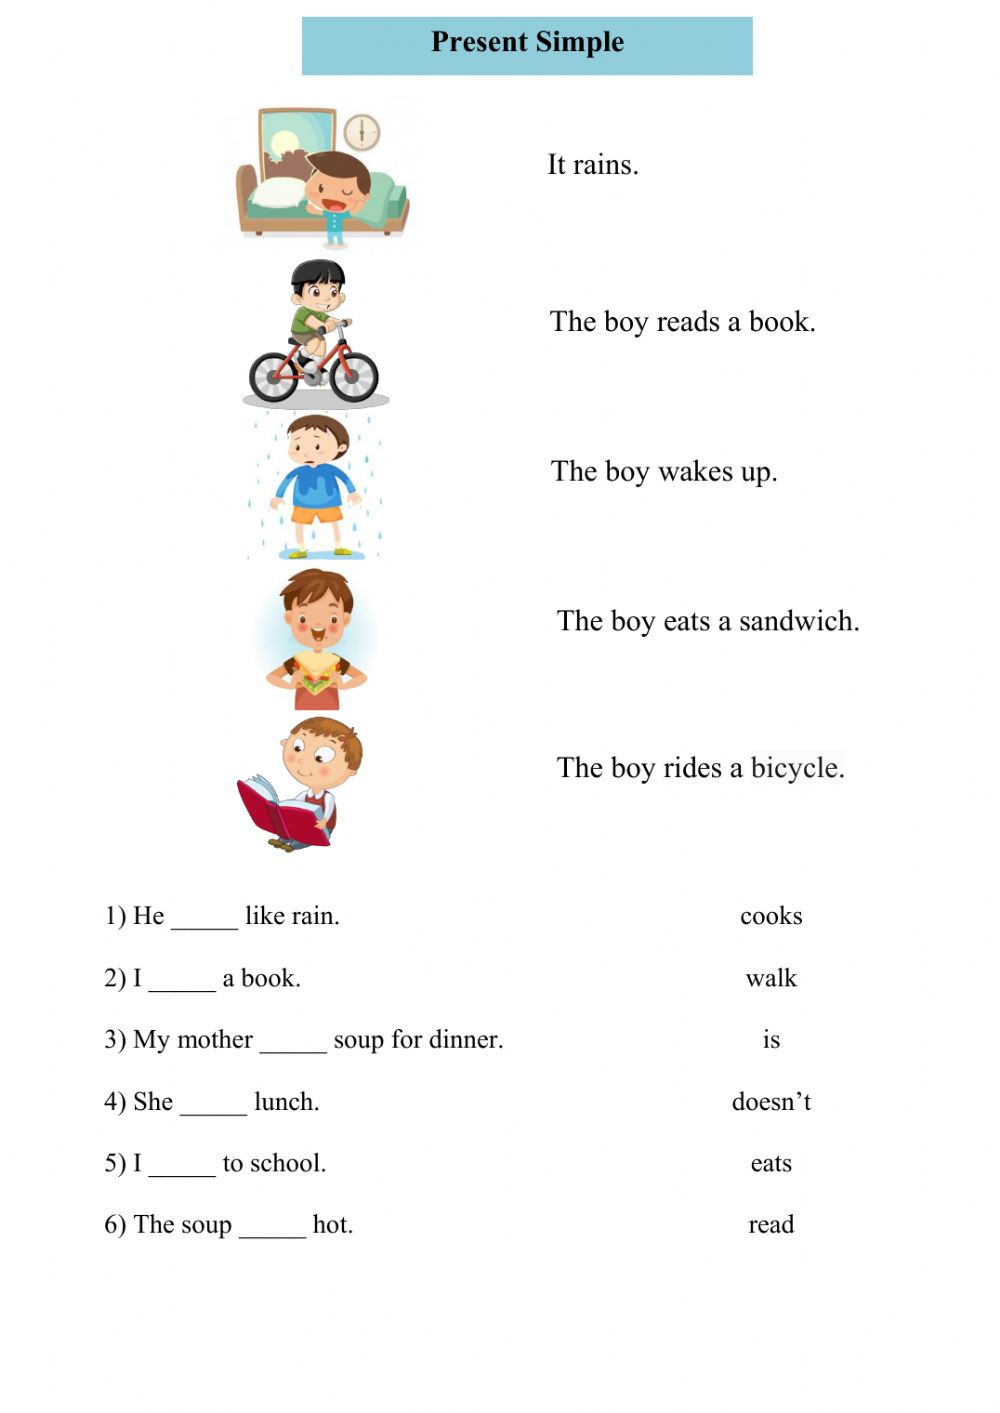 Present Simple Tense Online Pdf Exercise For Grade 2 intérieur Present Simple Exercises